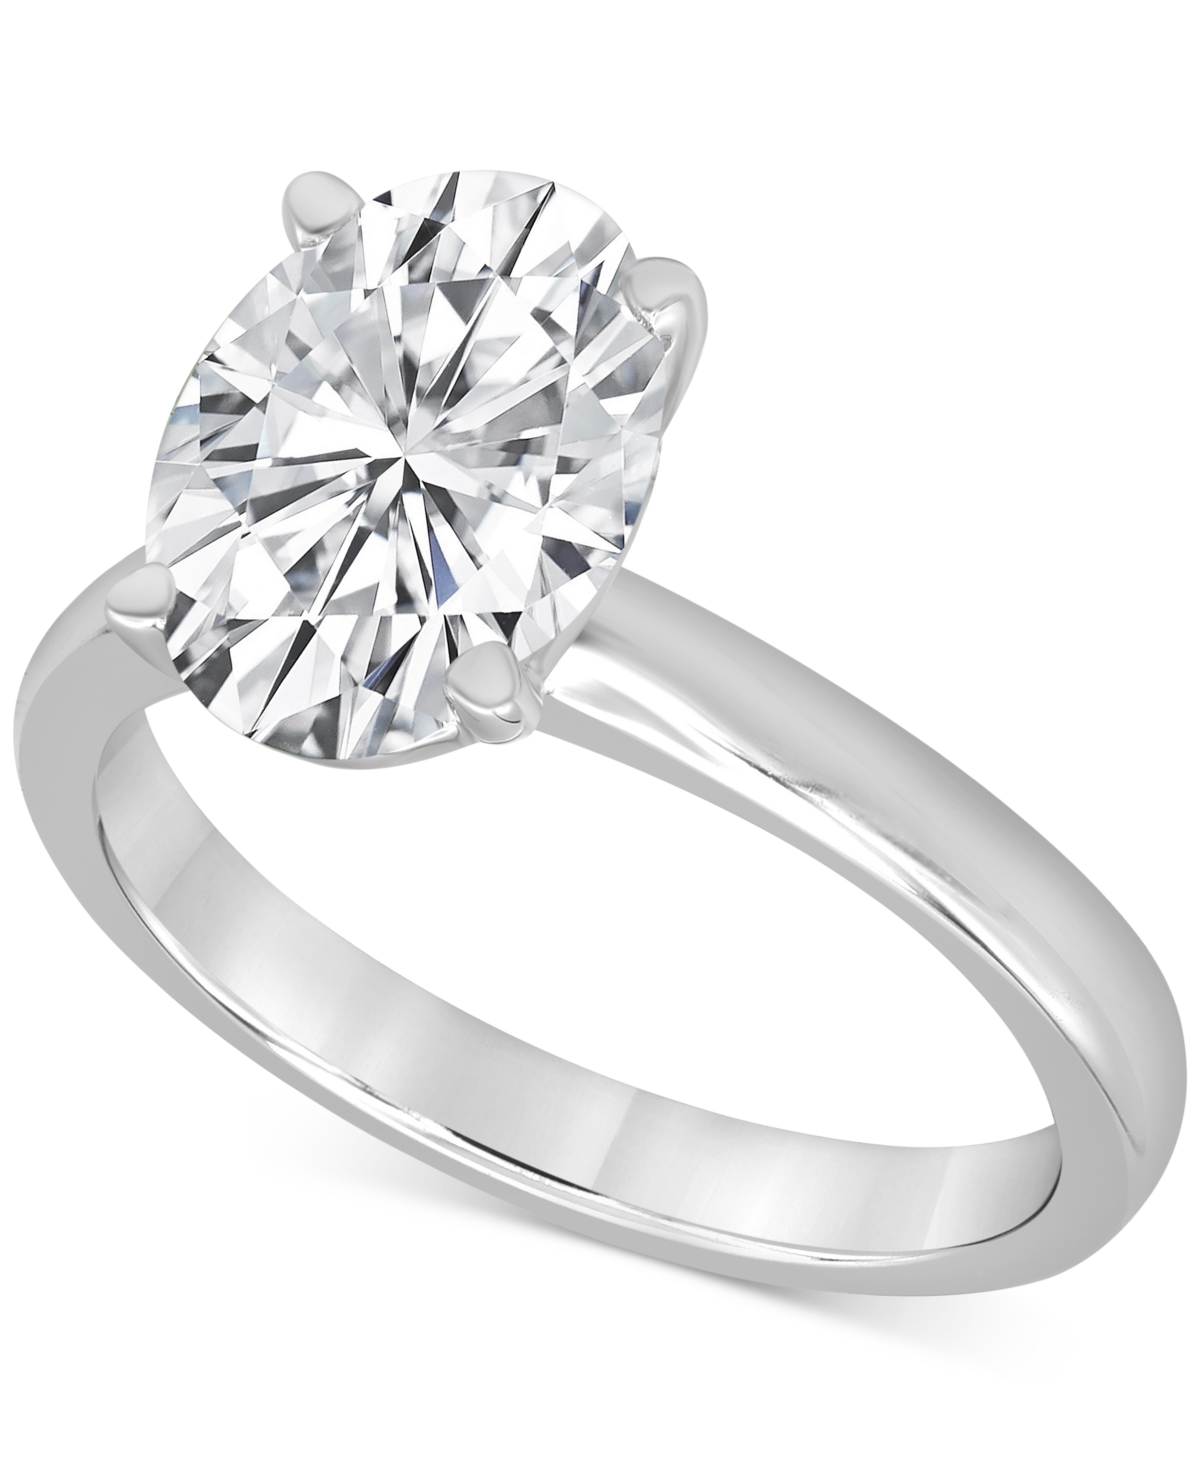 Badgley Mischka Certified Lab Grown Diamond Oval-Cut Solitaire Engagement Ring (3 ct. t.w.) in 14k White Gold